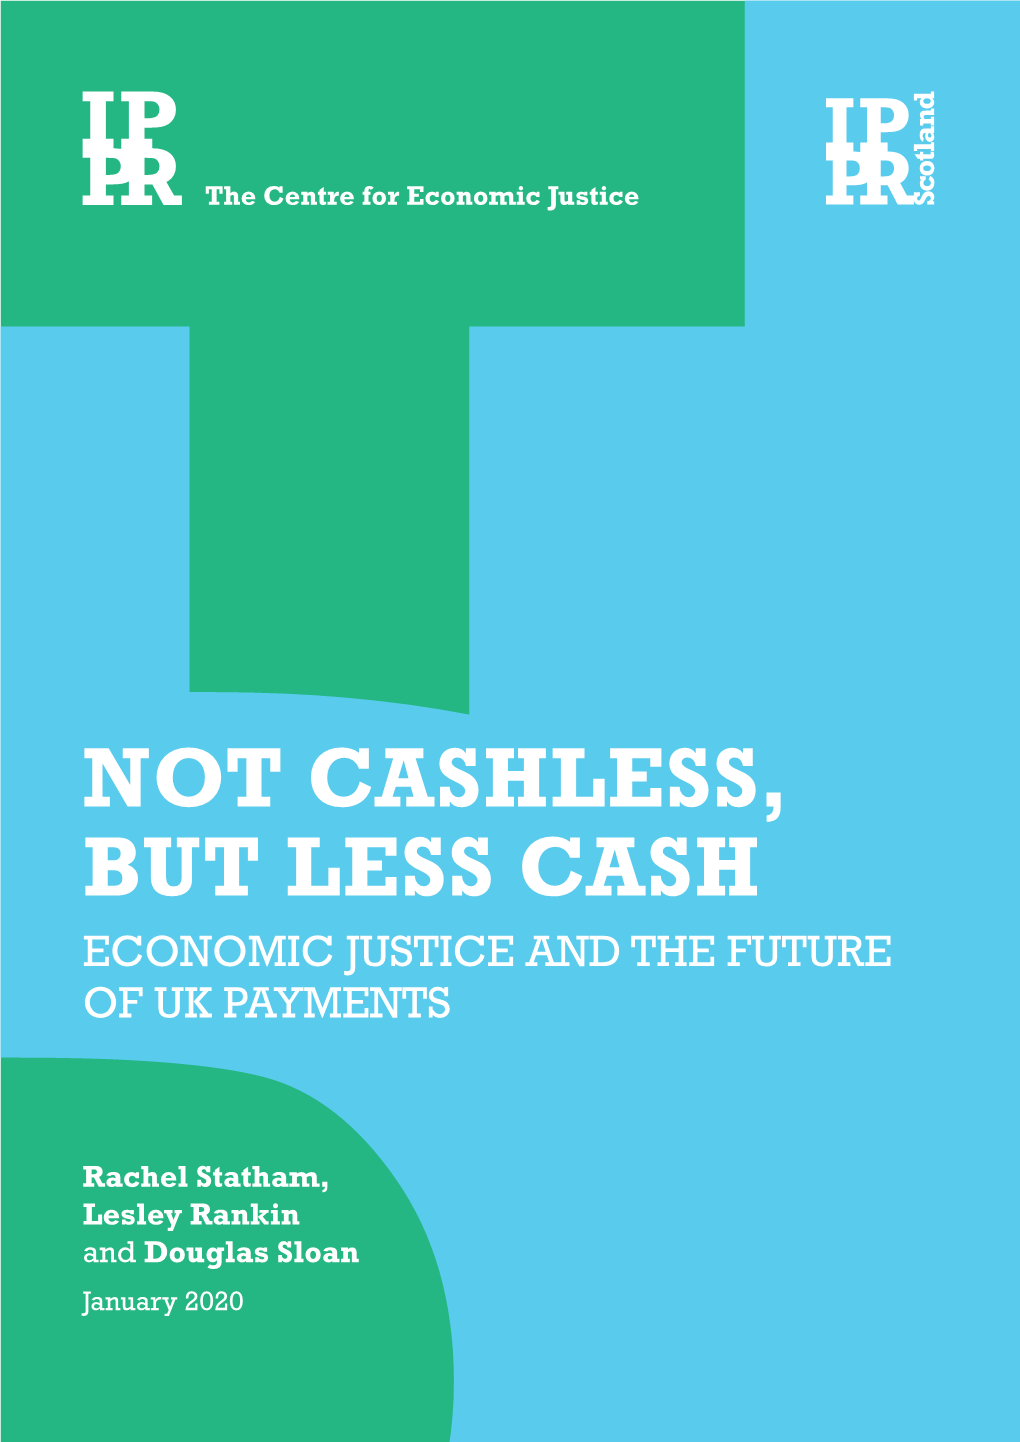 Not Cashless, but Less Cash: Economic Justice and the Future of UK Payments, IPPR